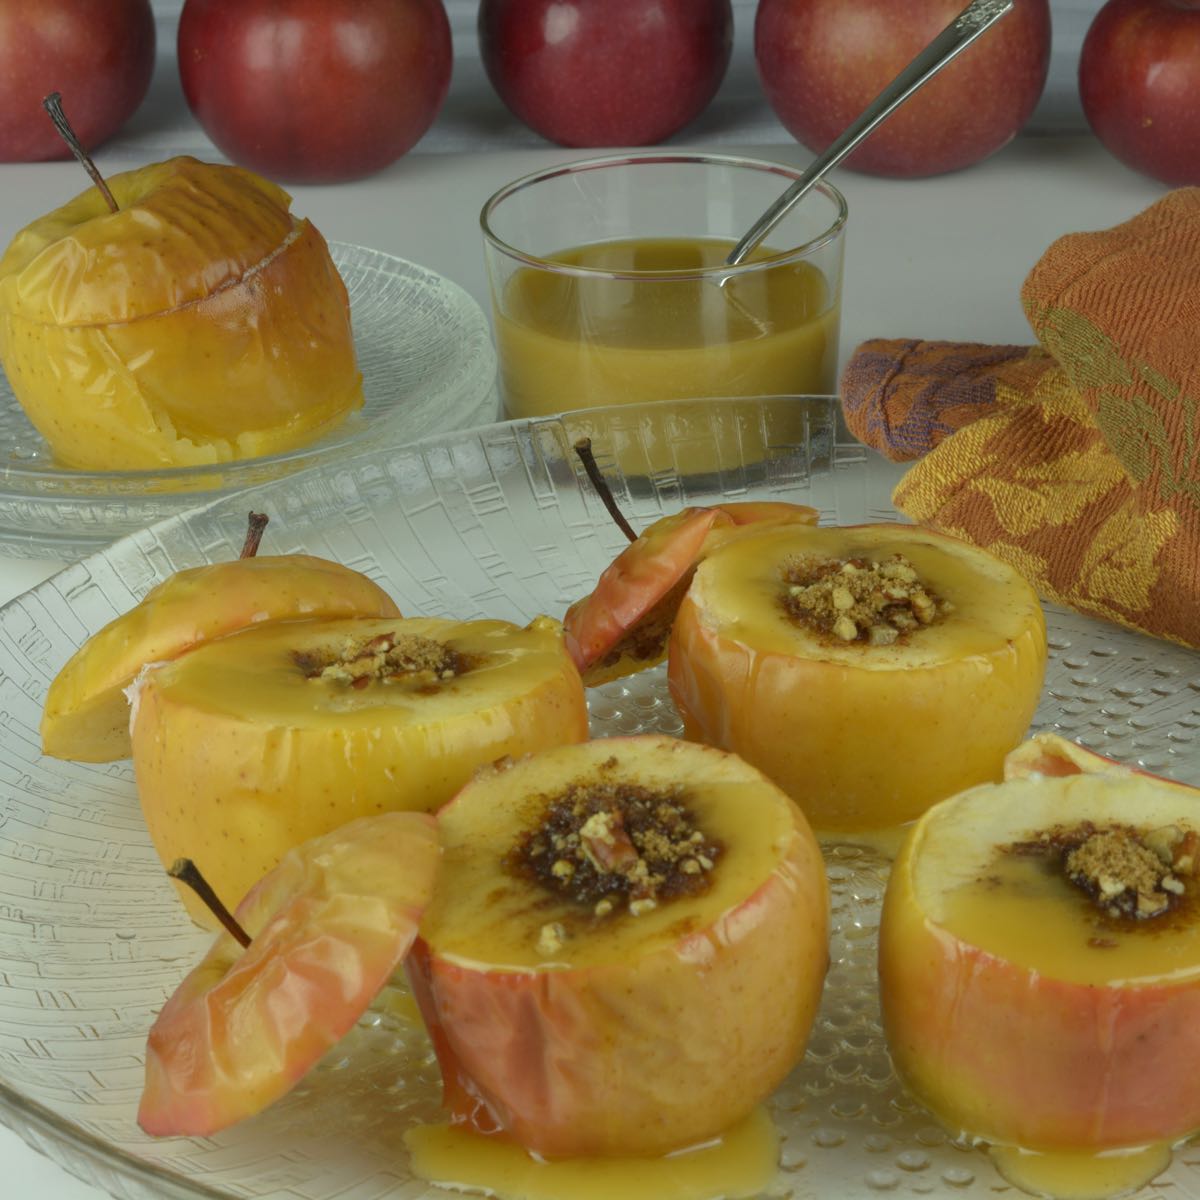 A platter of stuffed Baked Apples with Caramel Sauce drizzled on top.